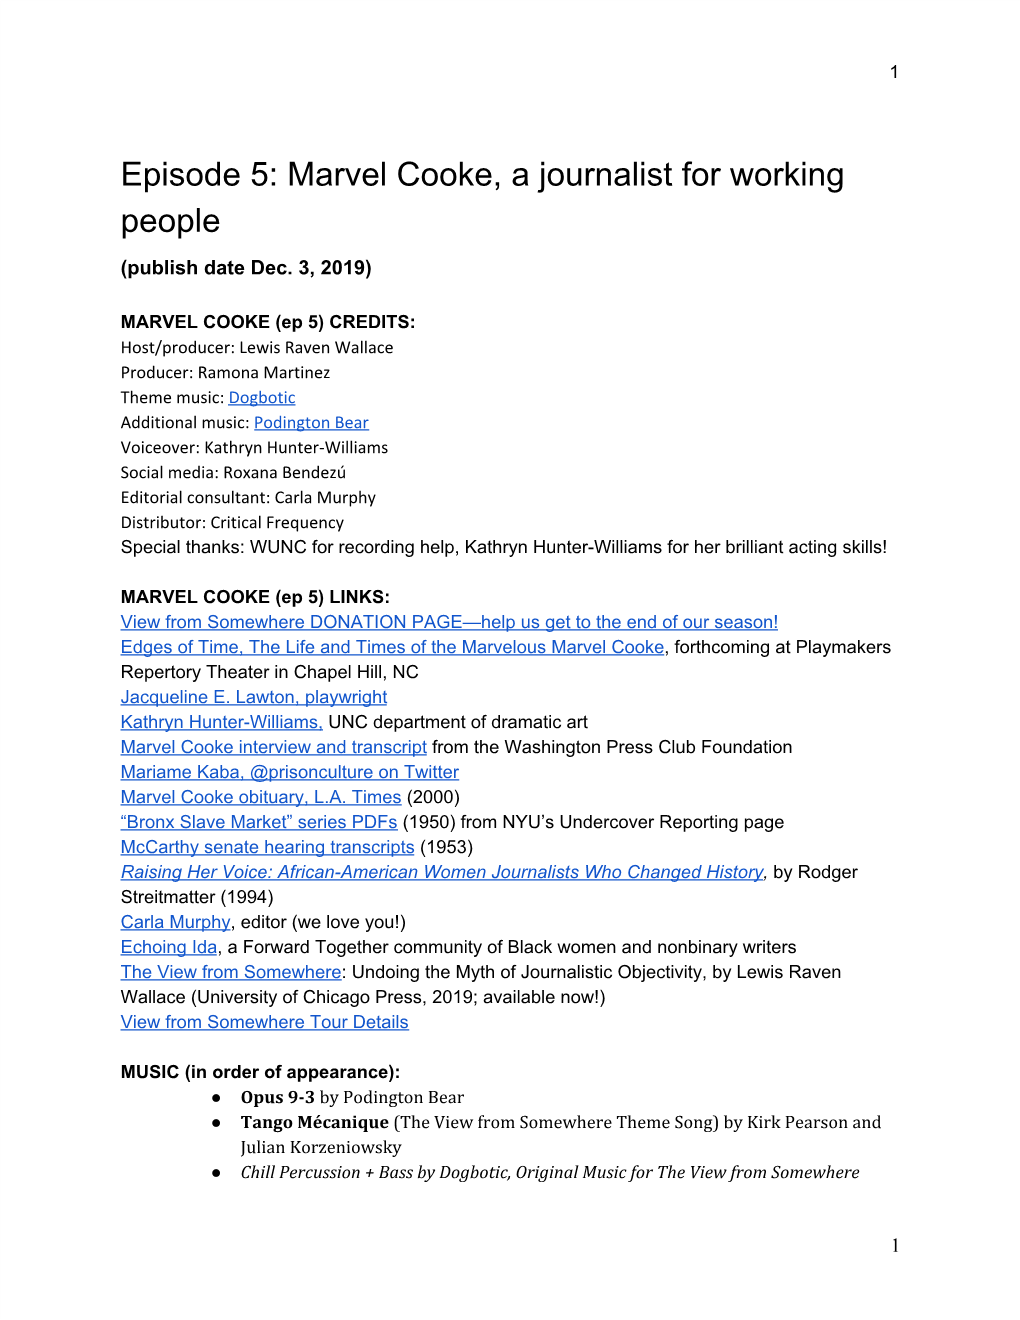 Episode 5: Marvel Cooke, a Journalist for Working People (Publish Date Dec